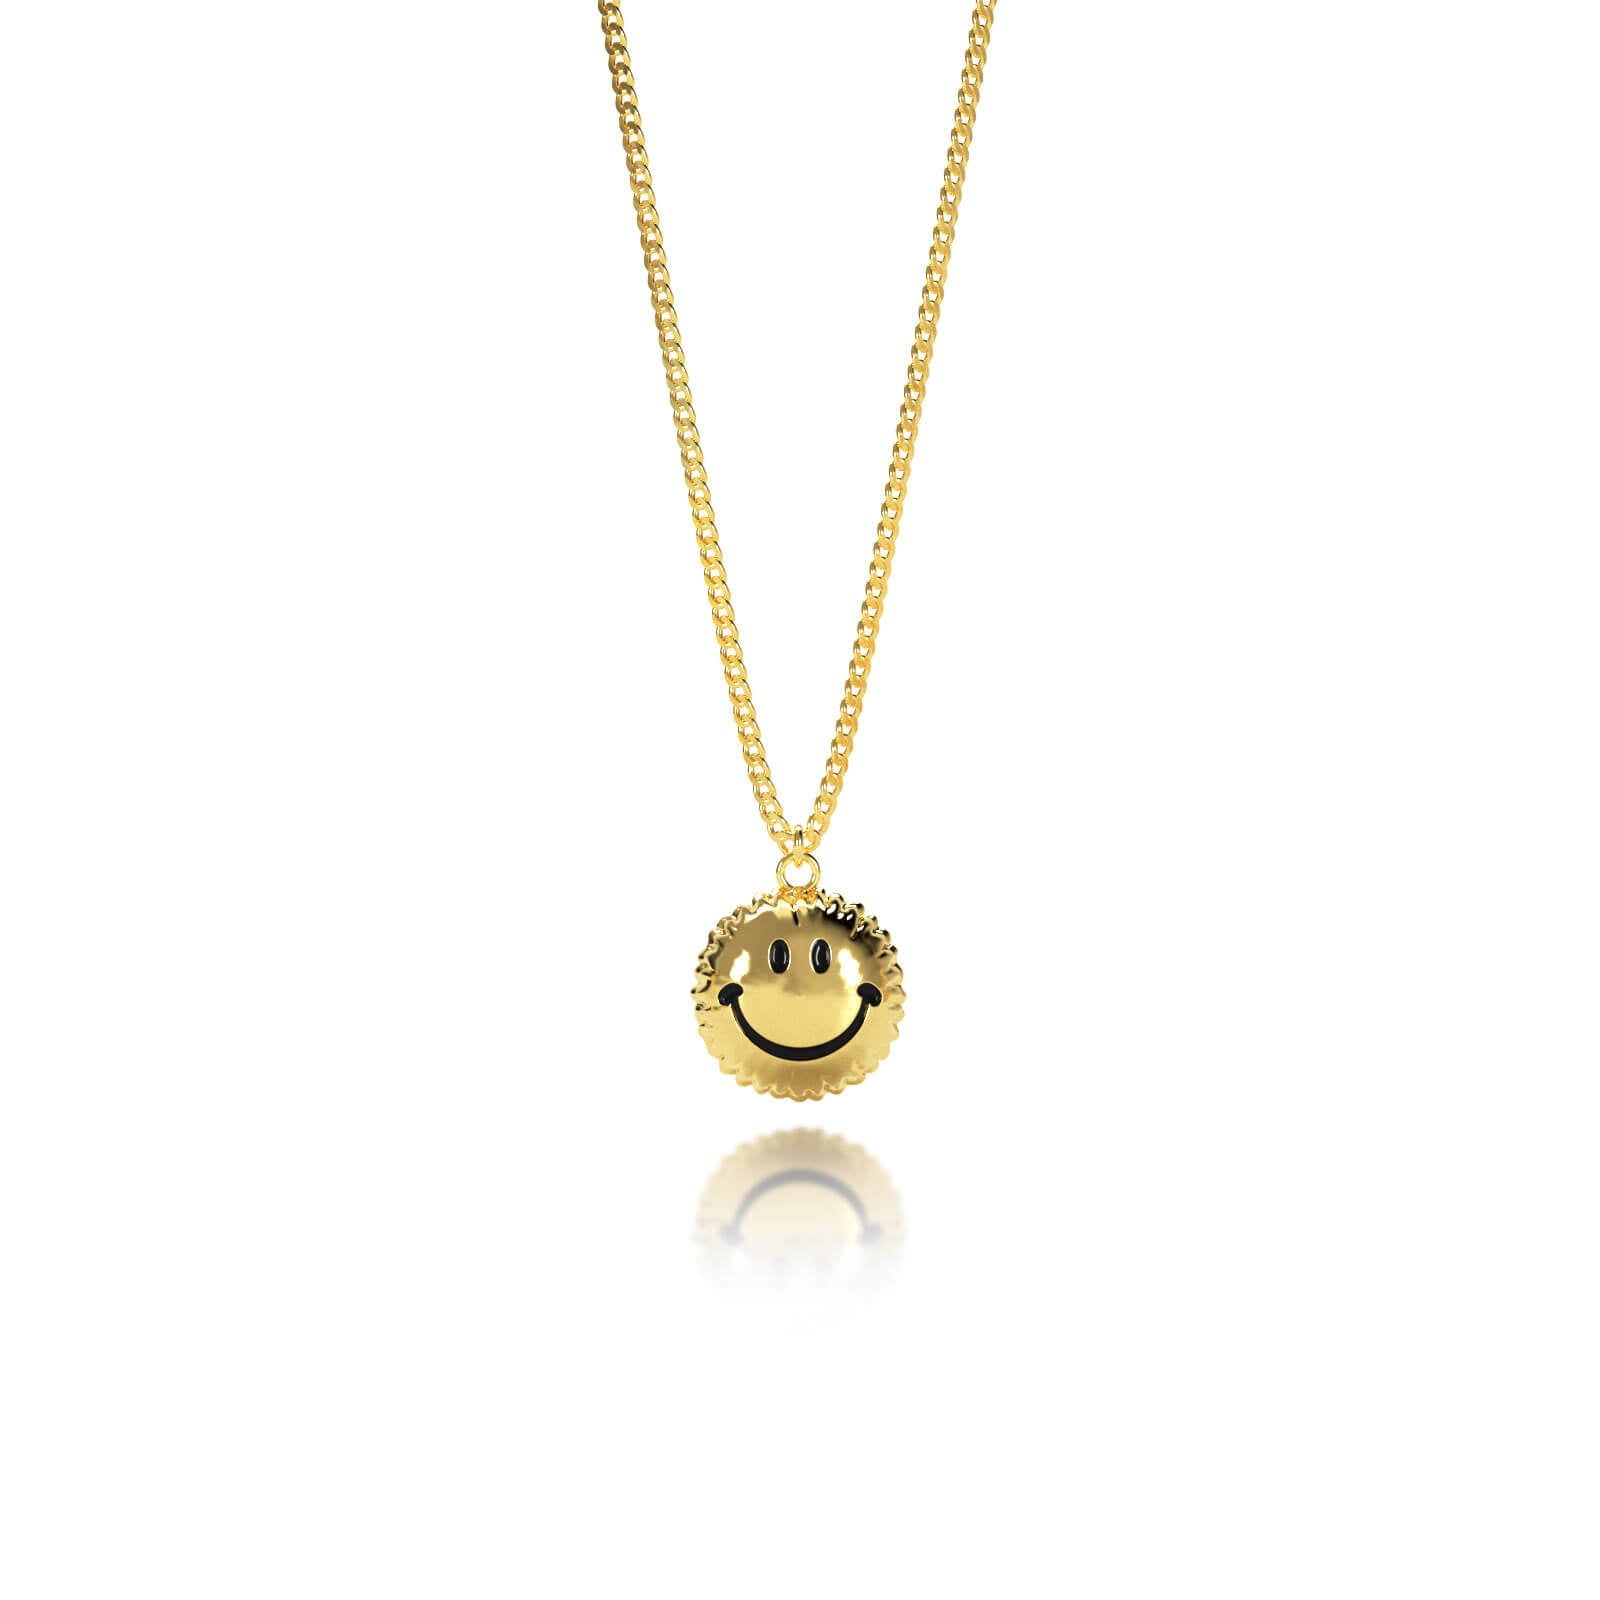 Gold NEW HAPPY FACE Balloon necklace - The ones that weren't going to come out